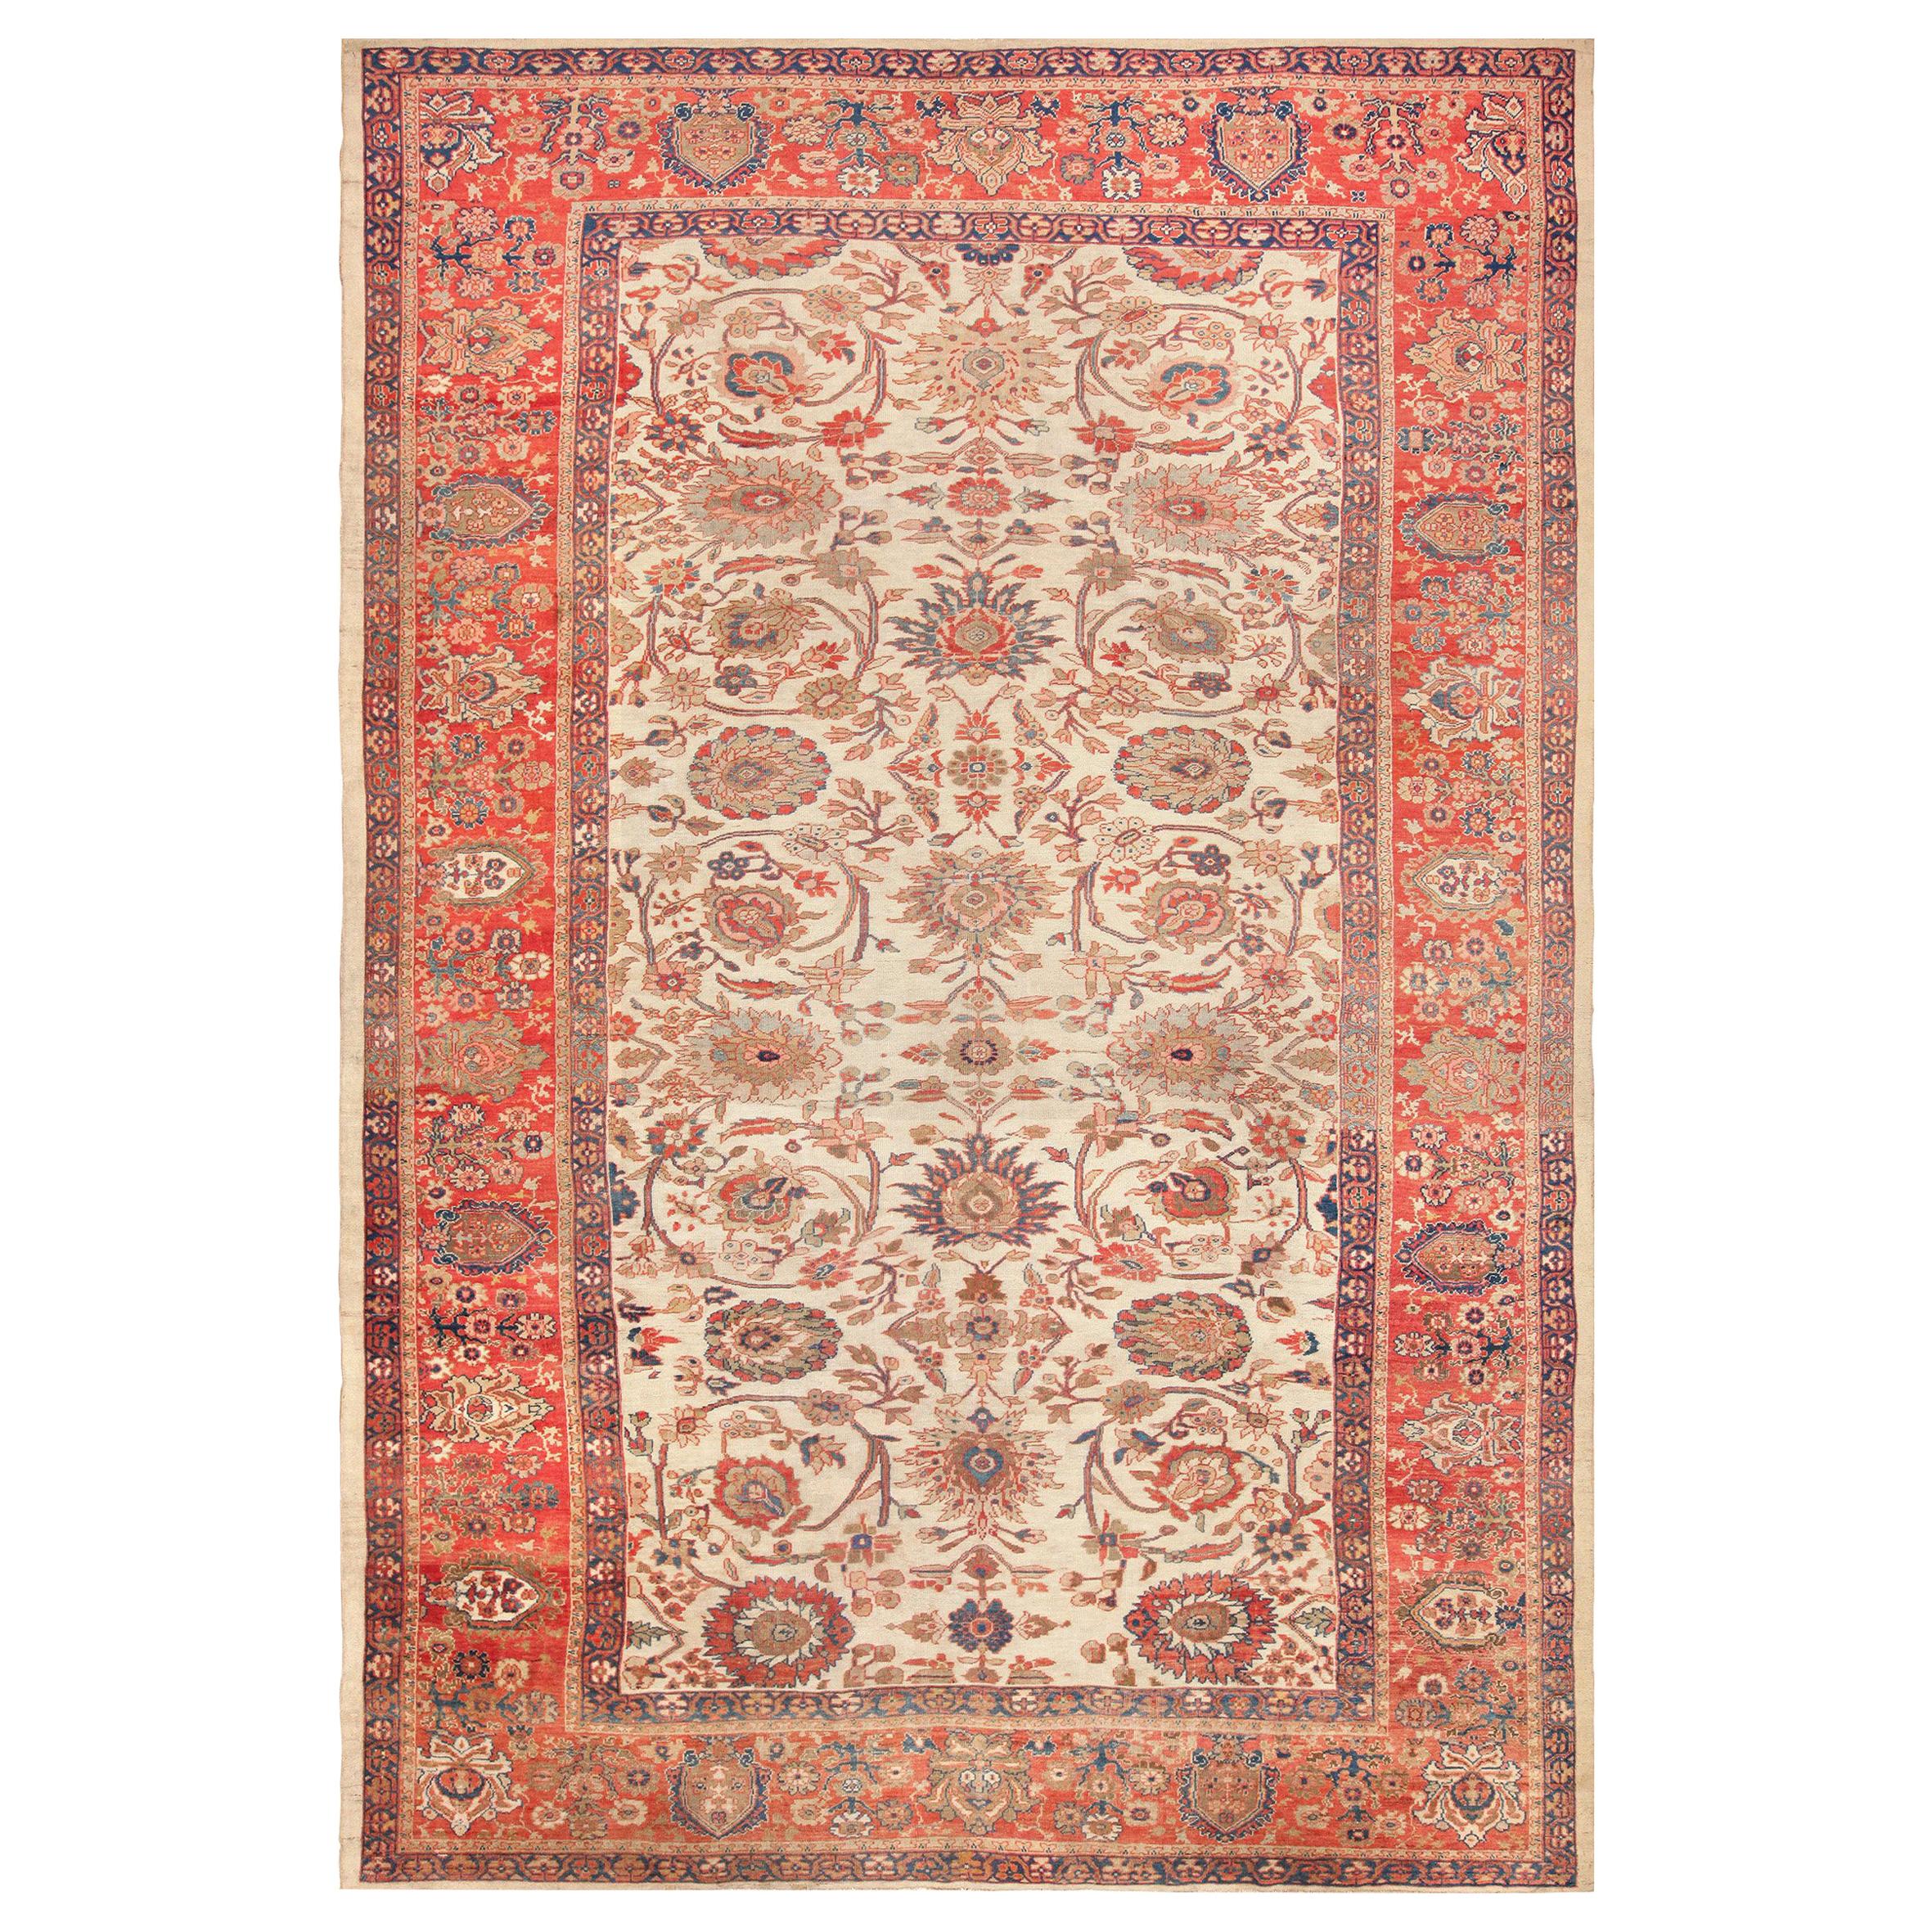 Large Ivory Antique Persian Sultanabad Rug. Size: 12 ft x 17 ft 10 in 